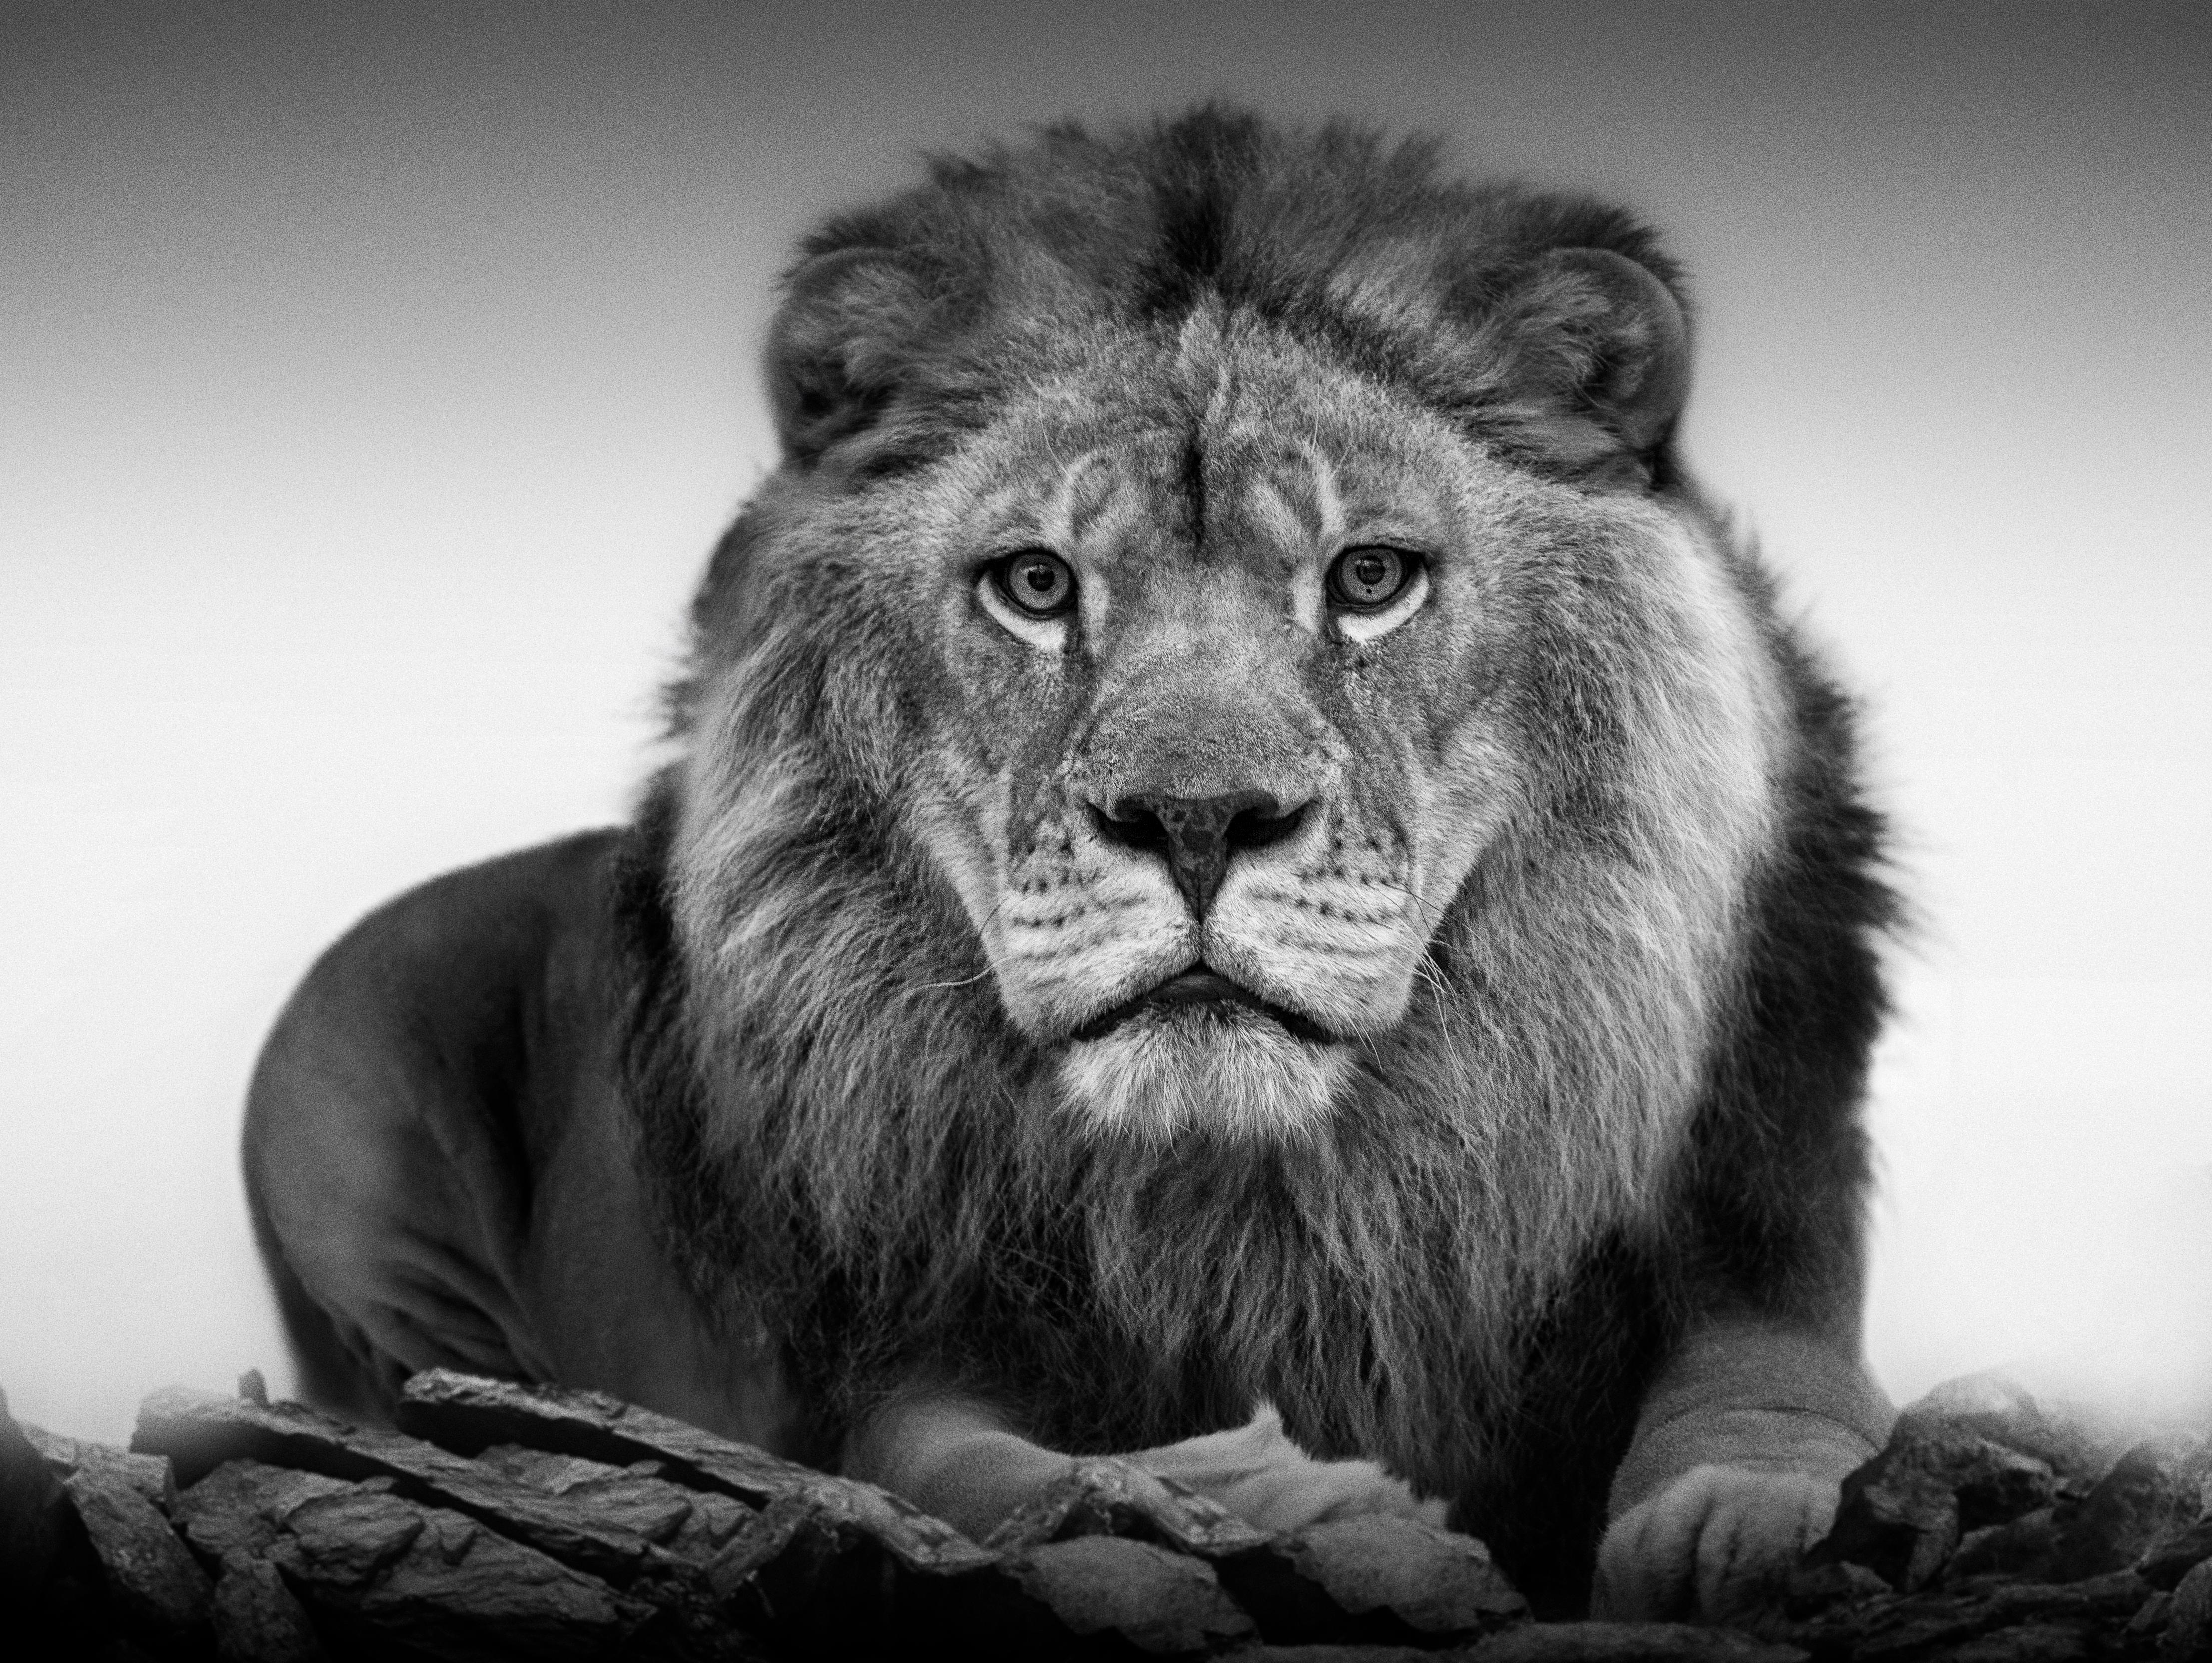 Shane Russeck Black and White Photograph - 36x48  "Lion Portrait", Black and White Lion Photography  Photograph Signed Art